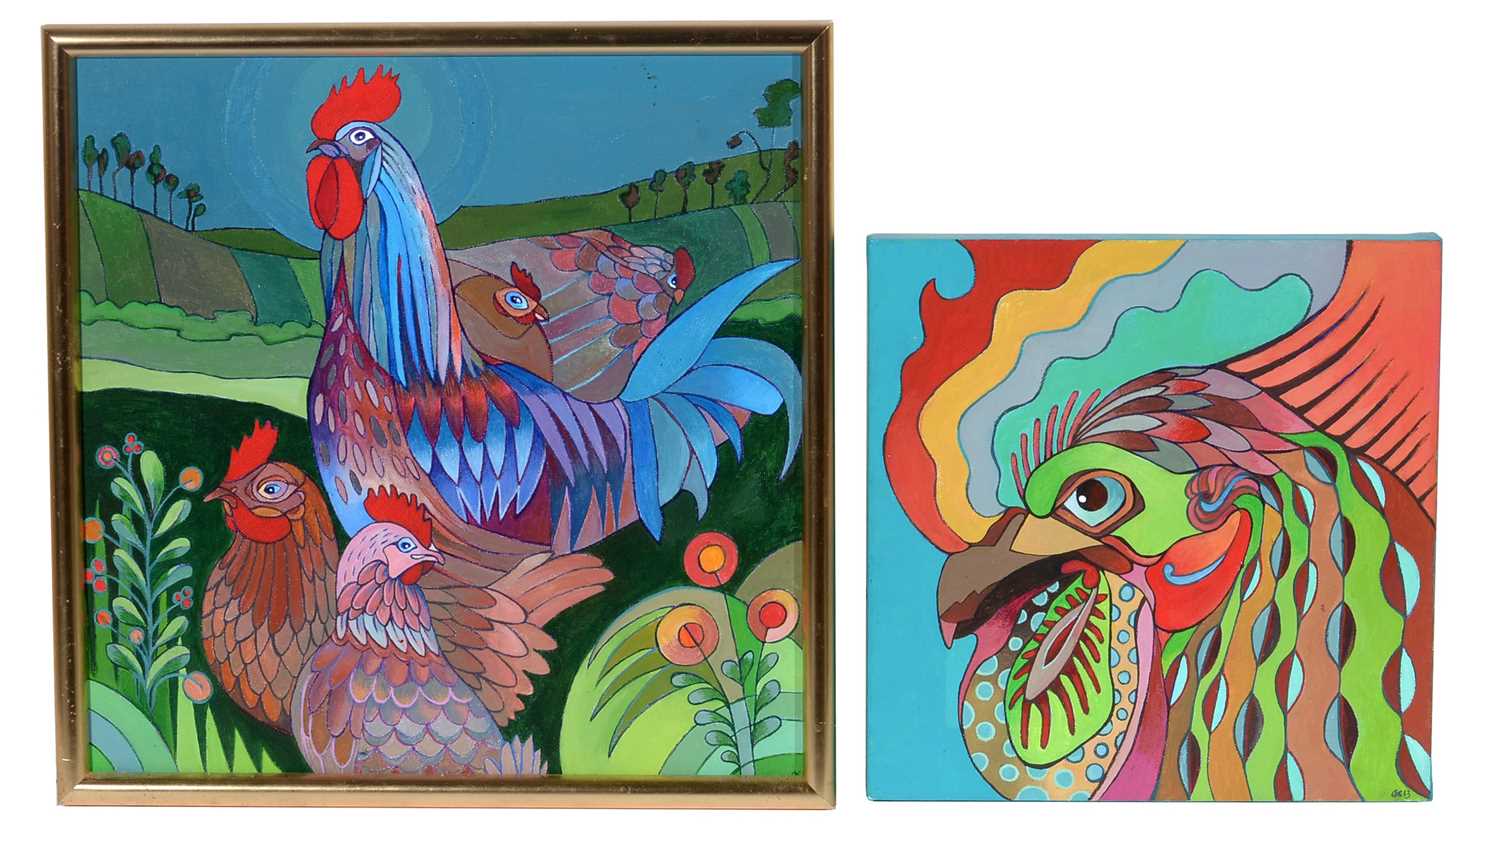 Lot 101 - Contemporary British - A Rooster and His Birds, and Study of a Hen | acrylic on canvas